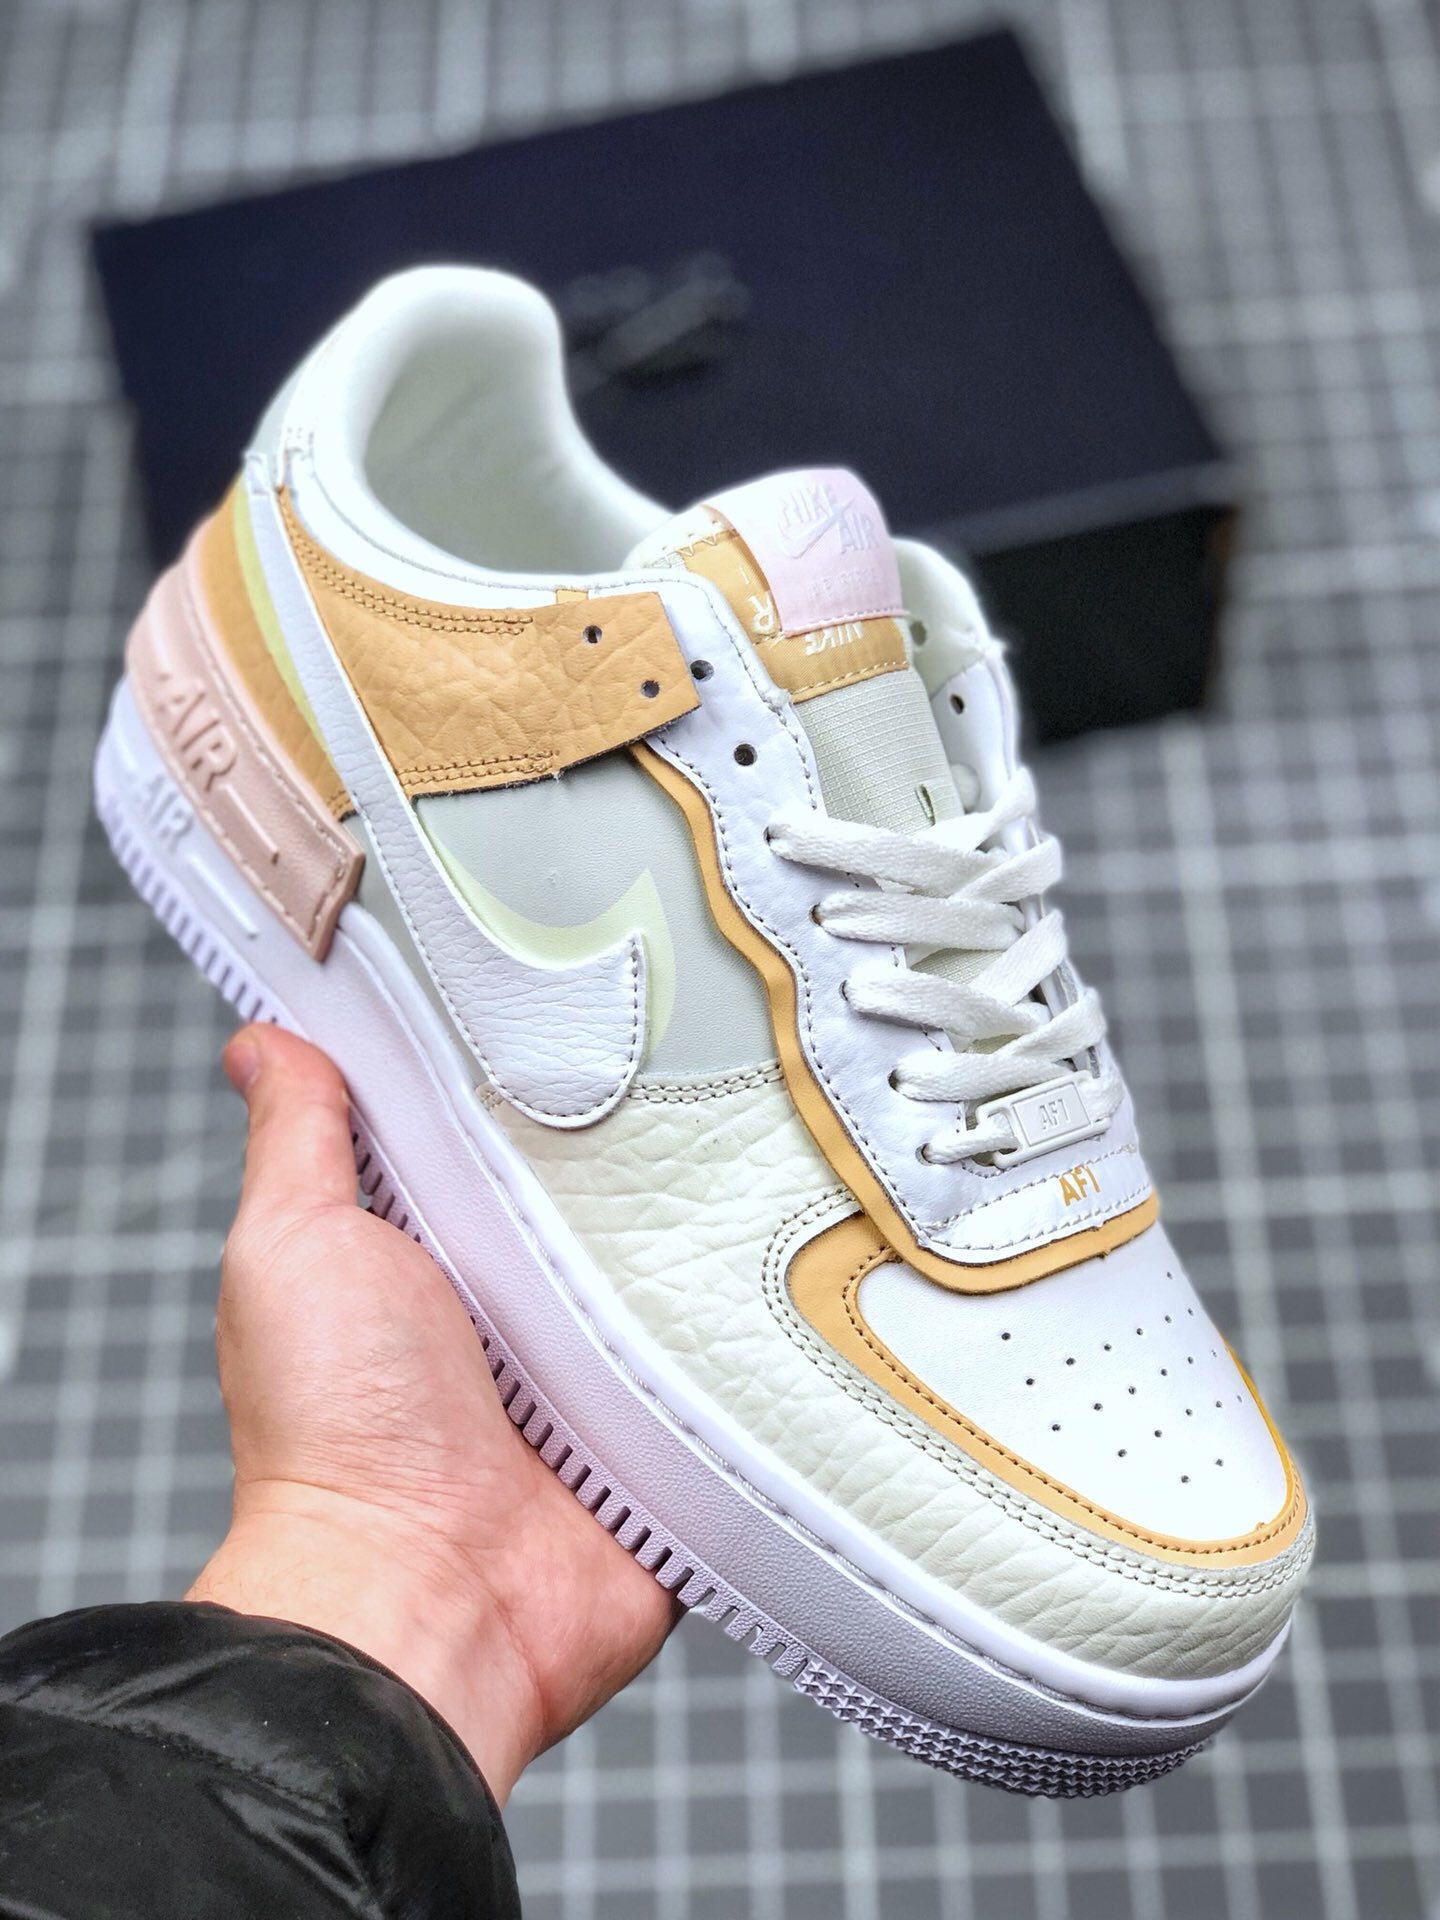 Nike Air Force 1 Shadow in “Spruce Aura/Sail” For Sale – Sneaker Hello